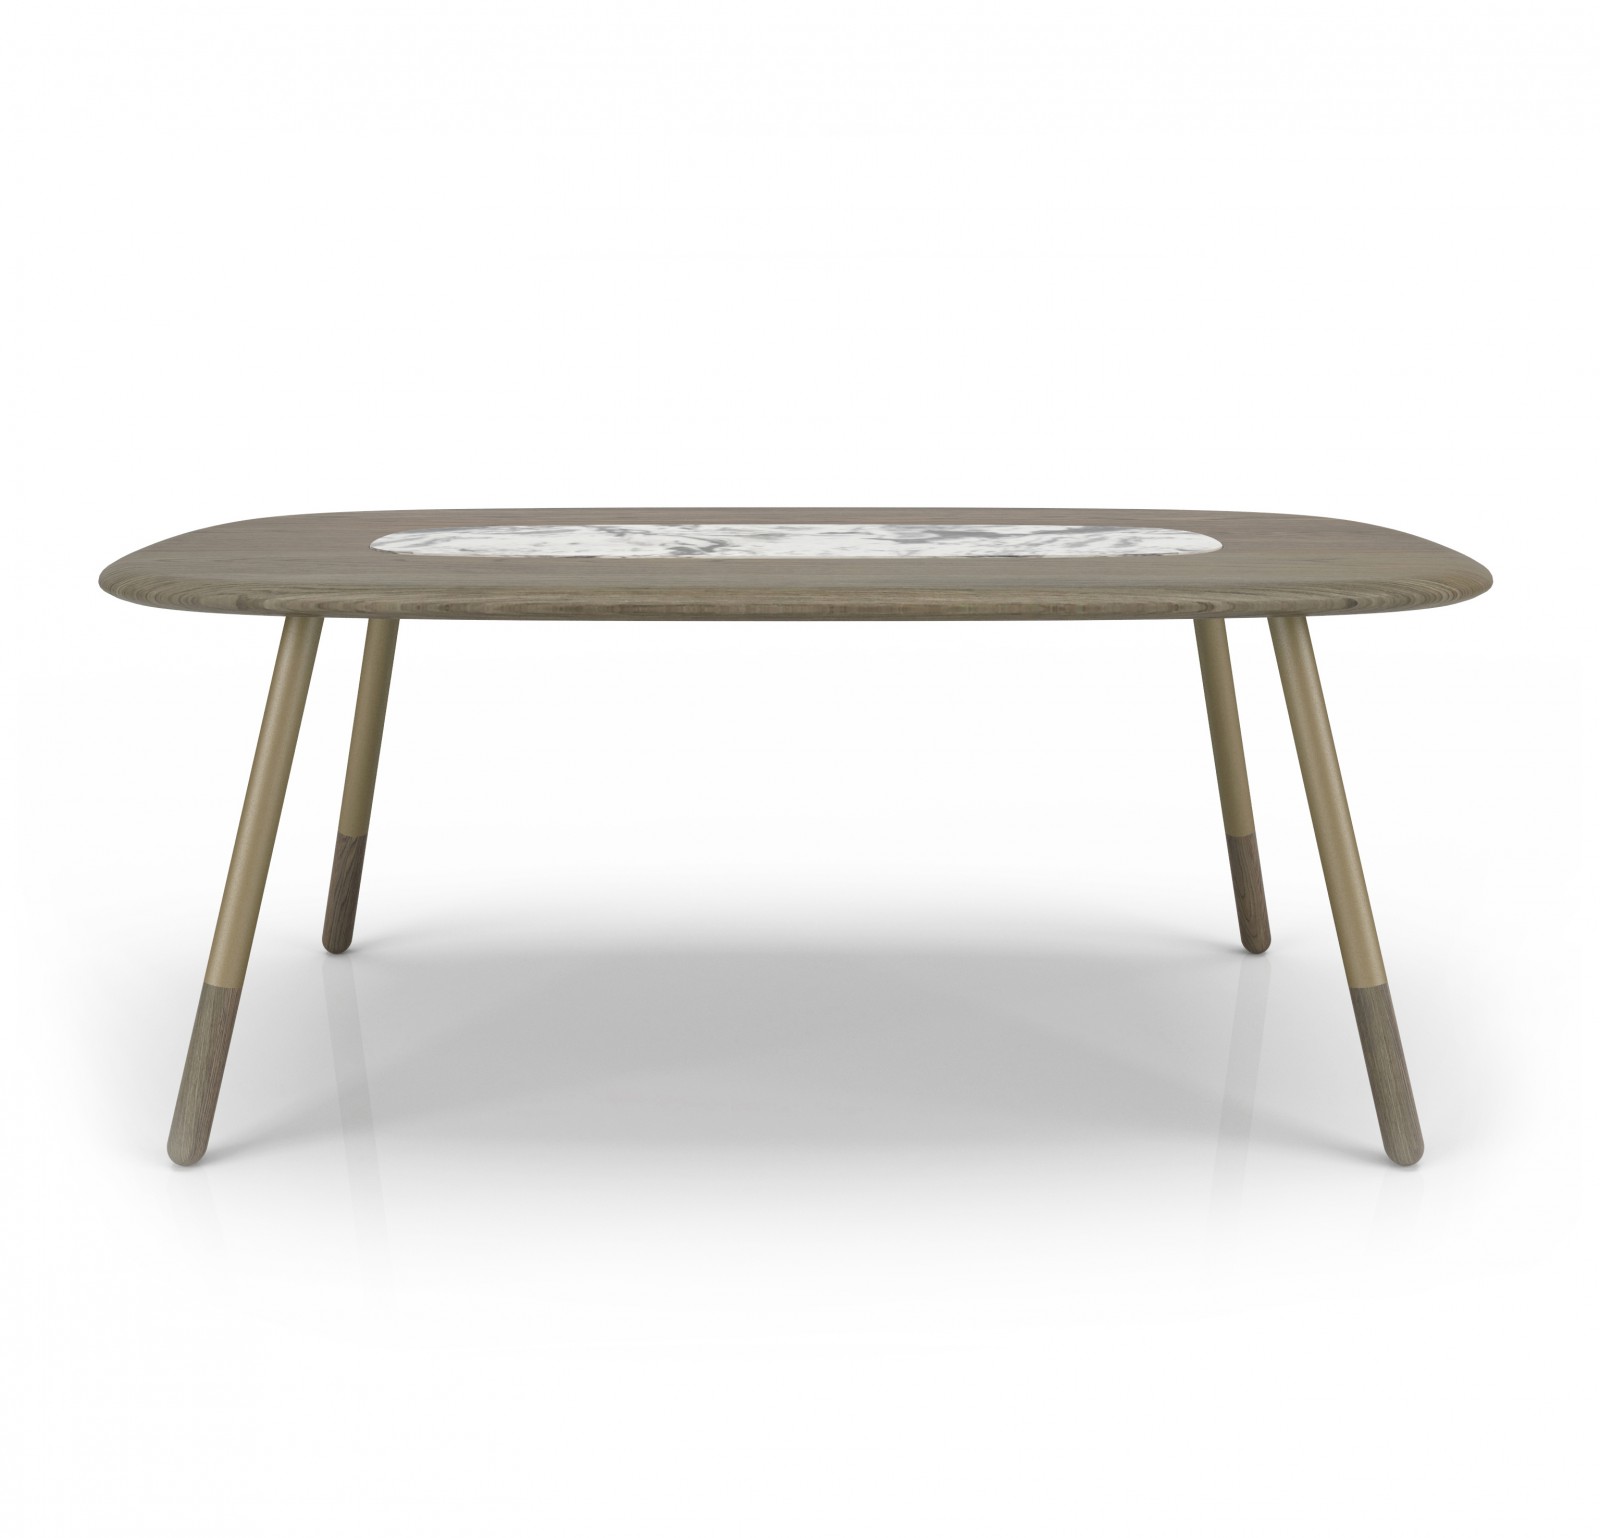 78'' Table with natural stone